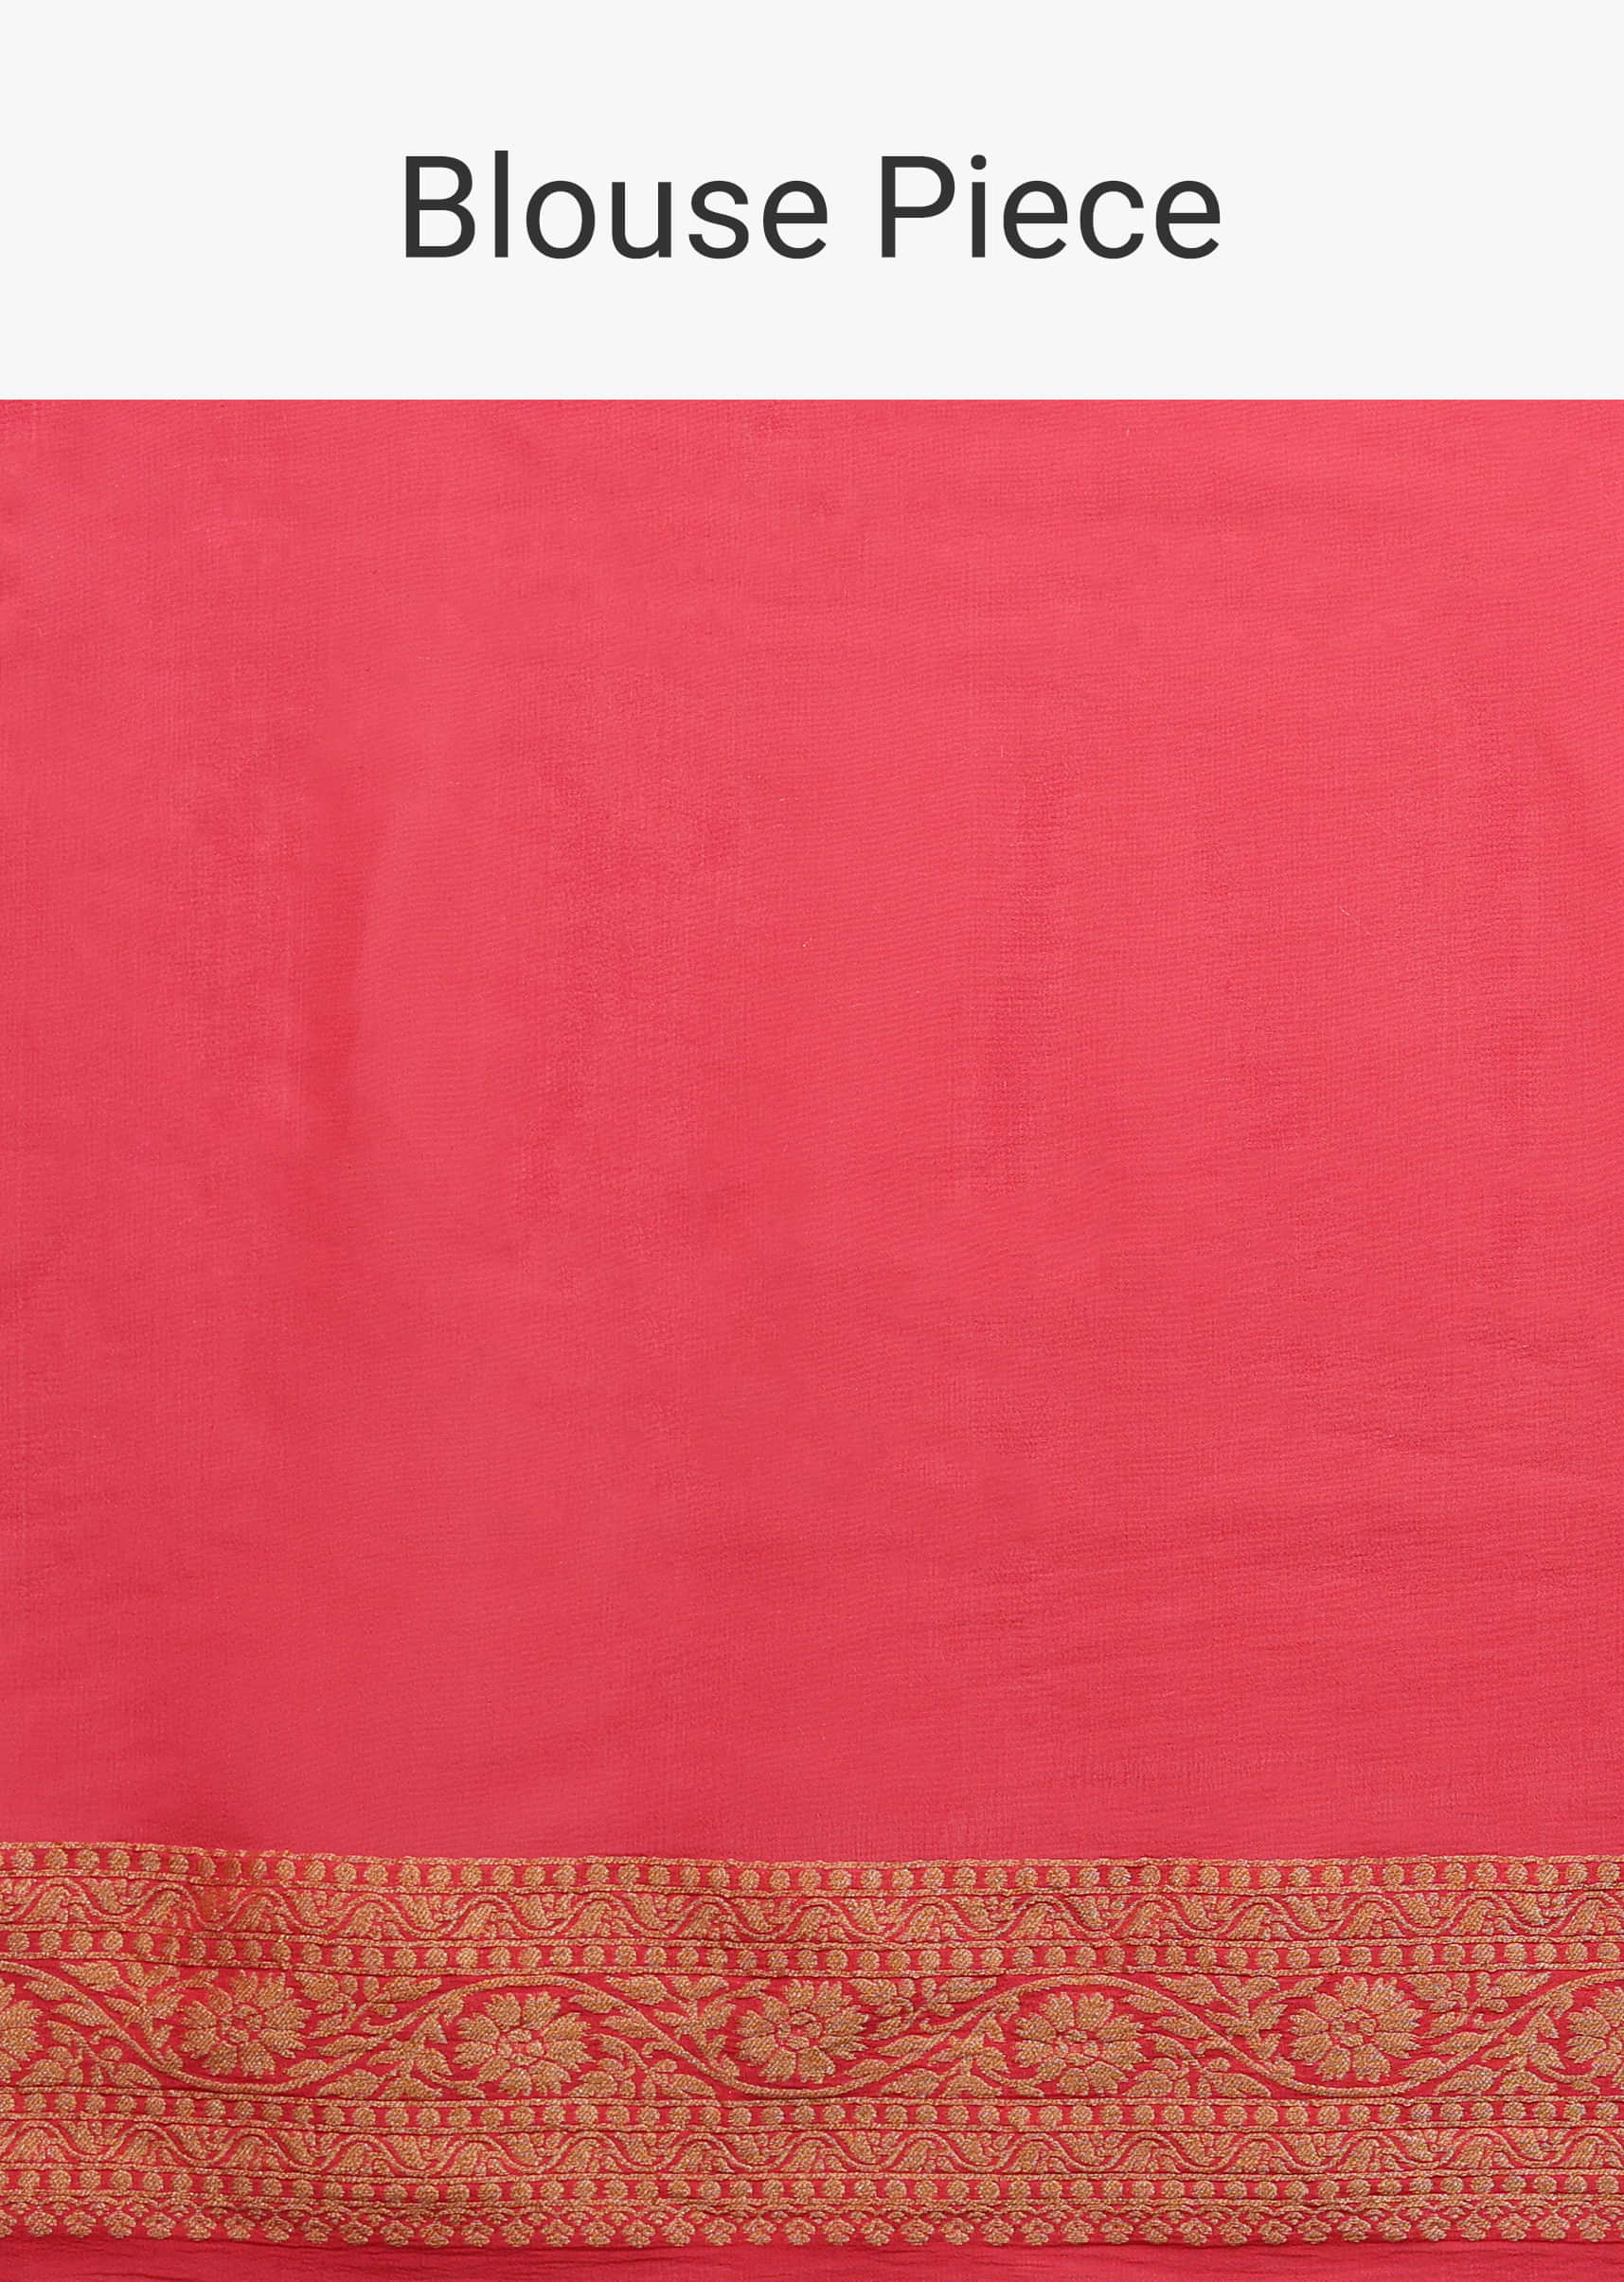 Coral Orange Traditional Saree In Georgette With Golden Floral Jaal Work